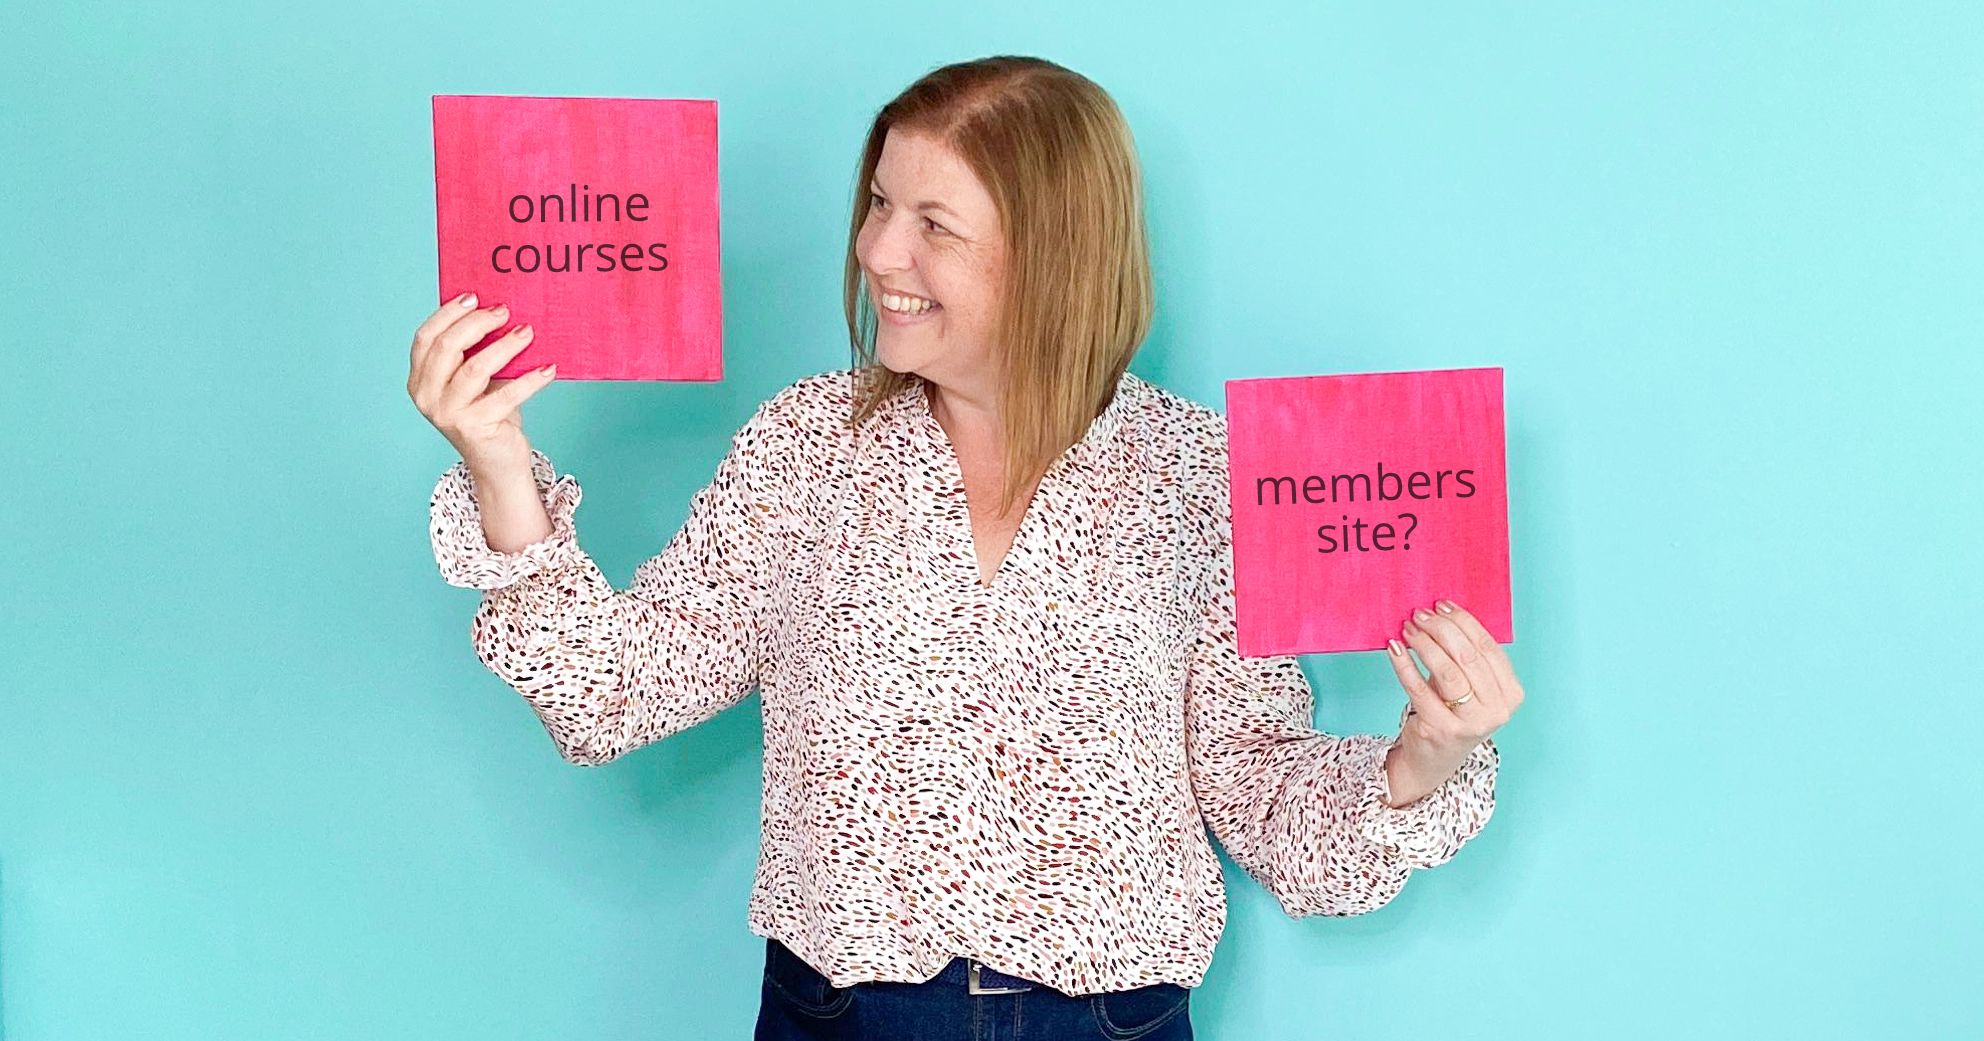 Choose to Create Online Courses or a membership? Words on pink boards held up by Susanna Reay, Digital Course Expert